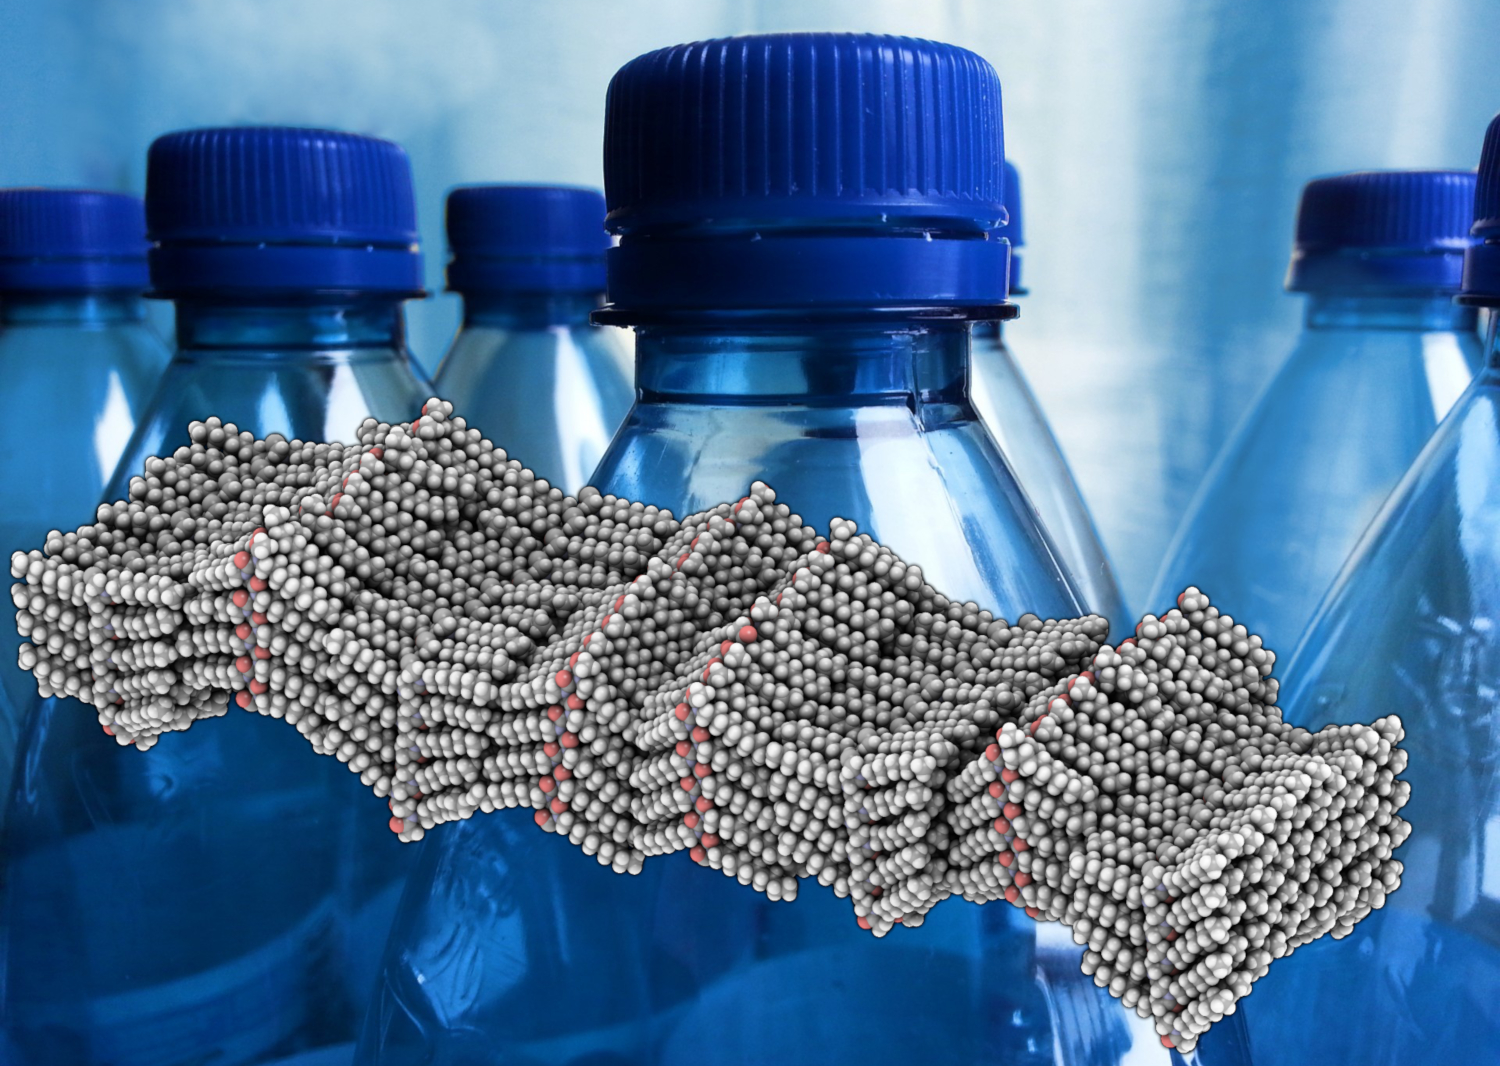 Rendering of the molecular structure of a peptoid polymer that was studied by a team led by Berkeley Lab and UC Berkeley. The team's success in imaging the atomic-scale structure of polymers could help inform the designs of plastics, like those in the water bottles shown here. (Credit: Berkeley Lab, Charles Rondeau/PublicDomainPictures.net)